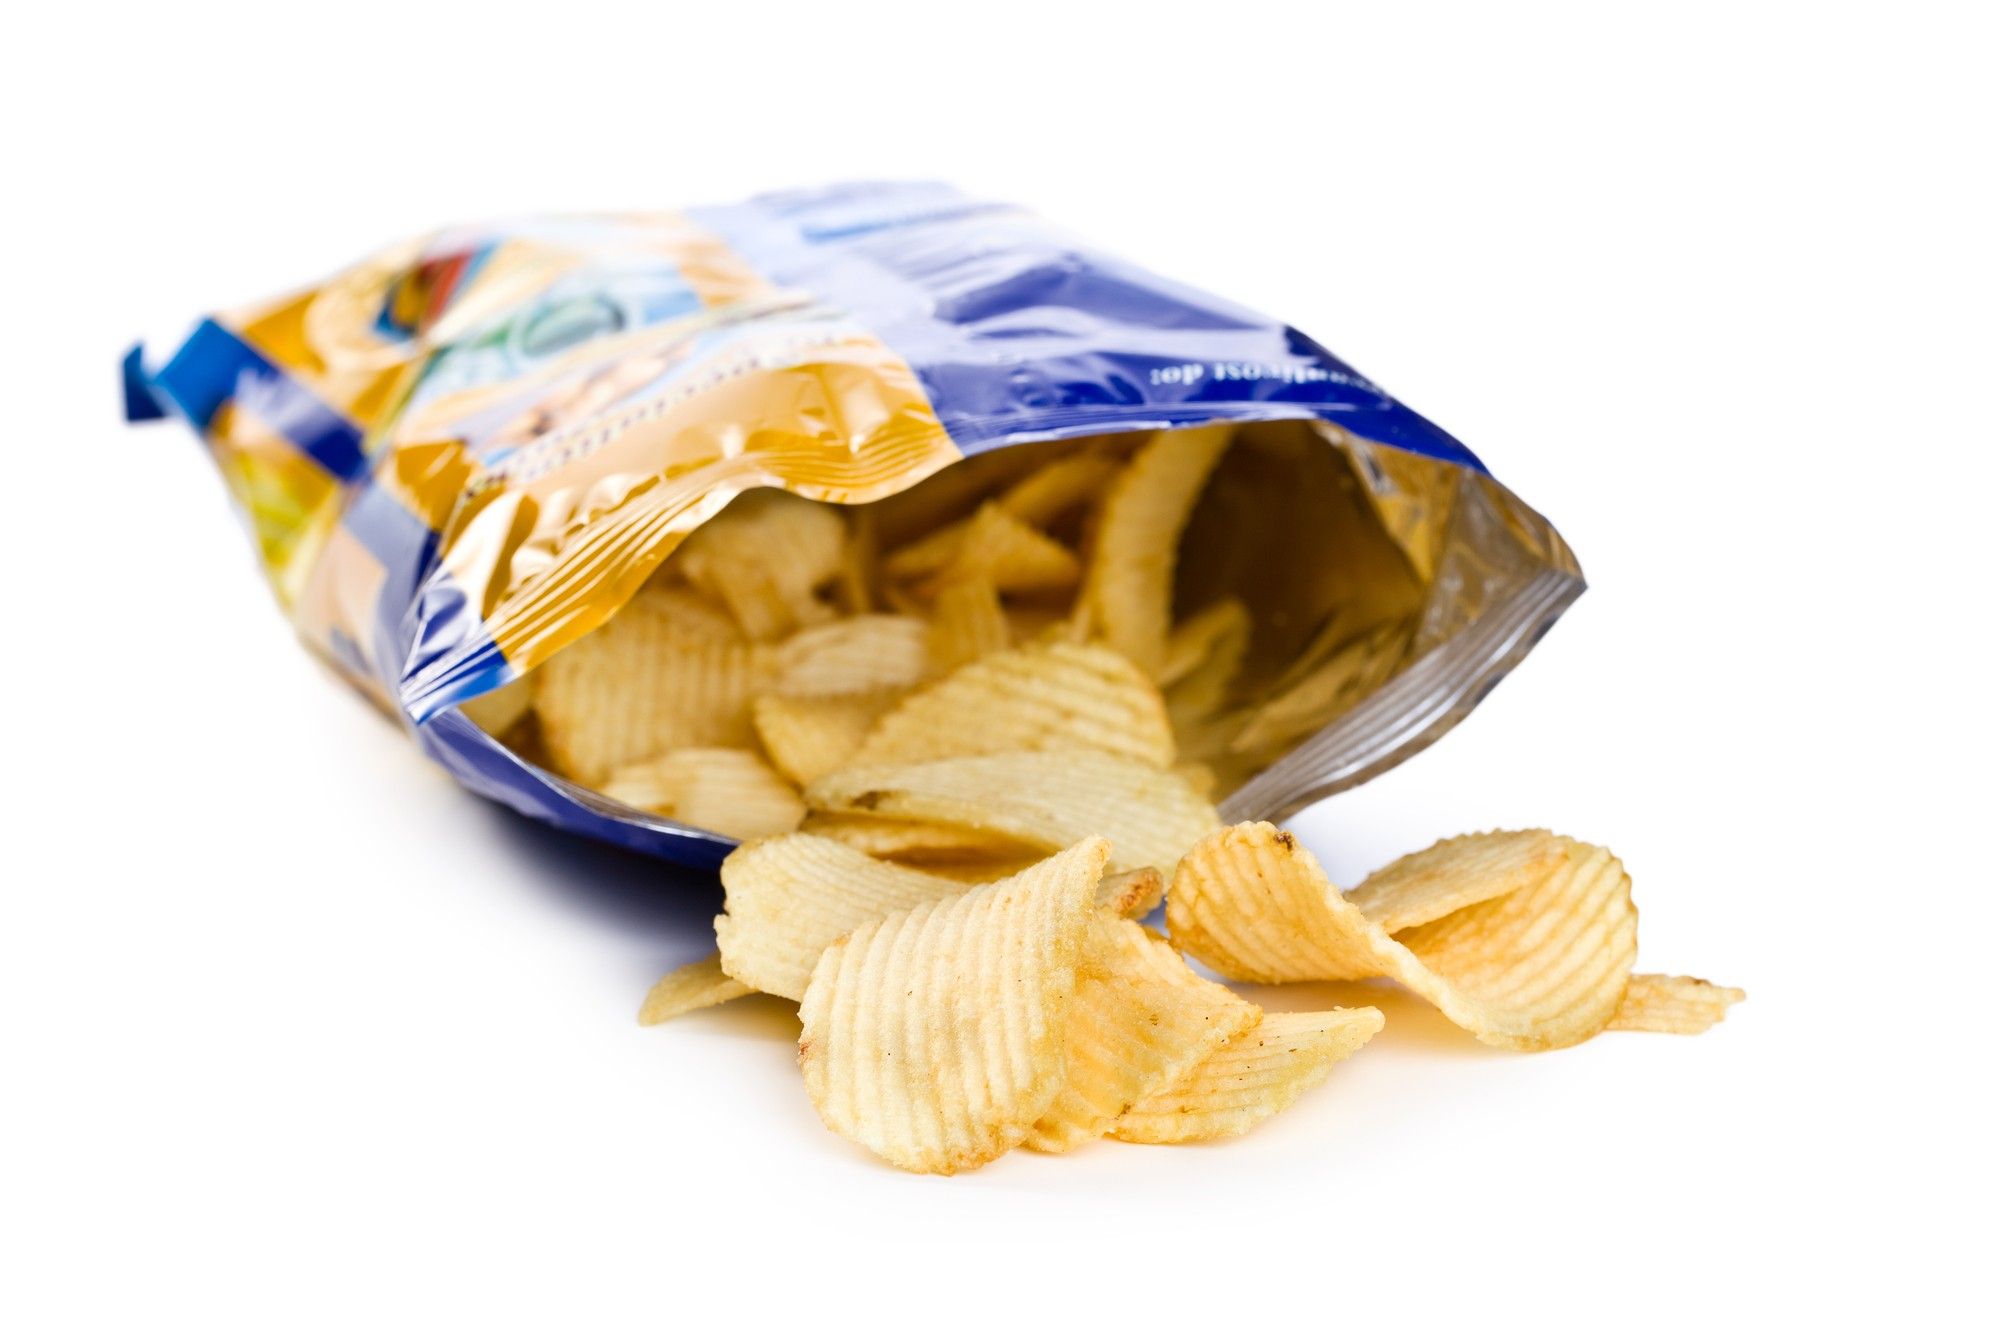 Ruffles Cheddar and Sour Cream chips are allegedly mislabelled.